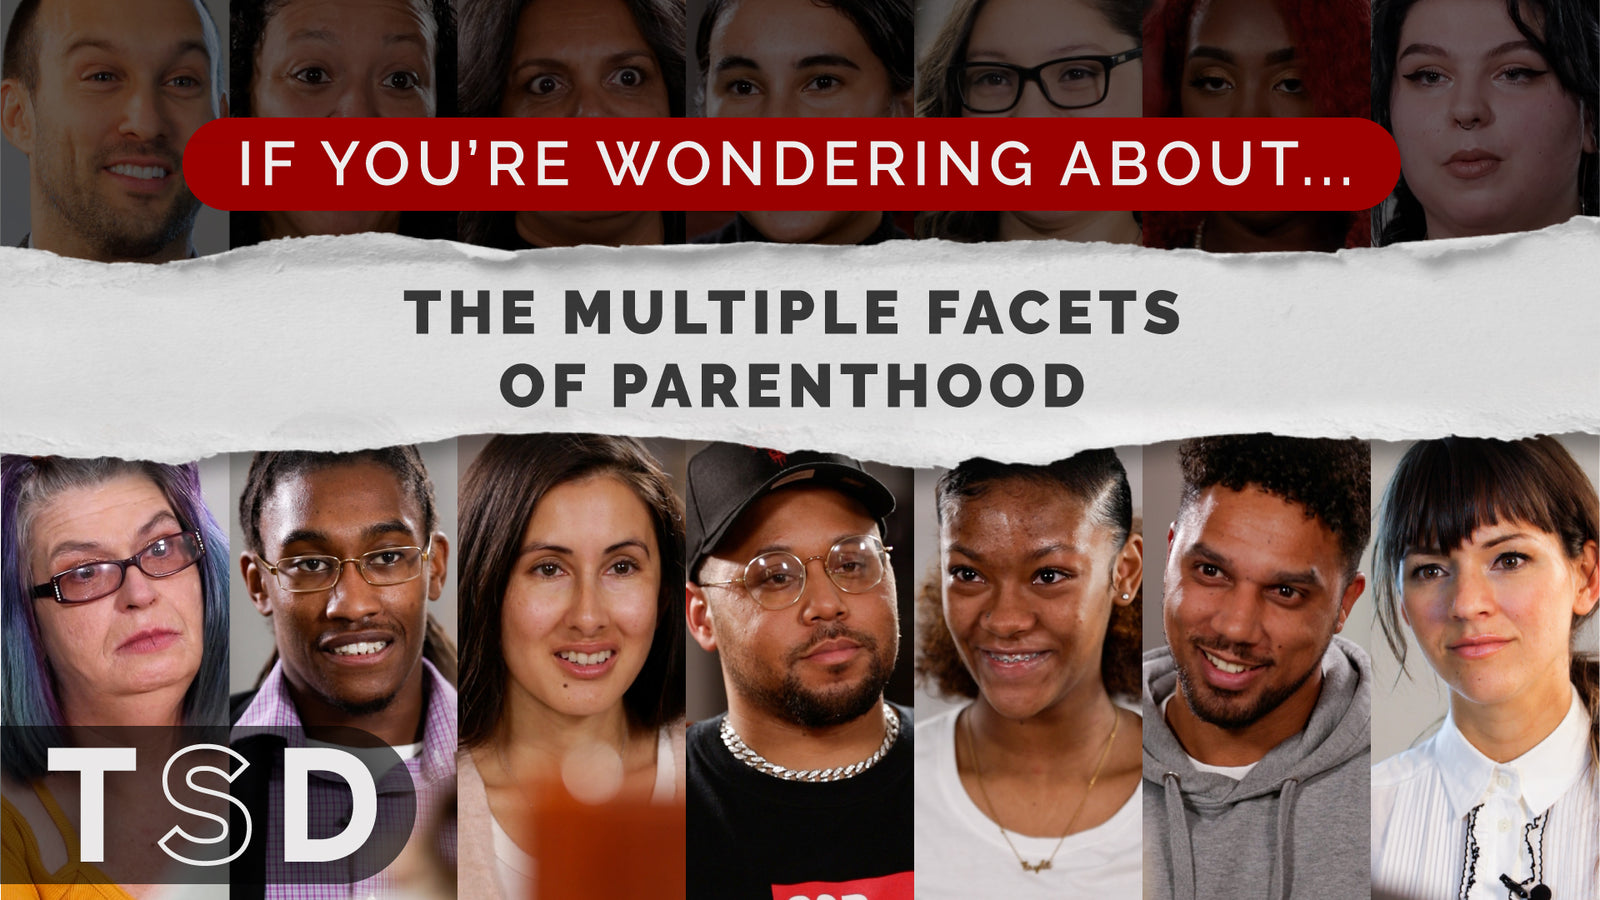 If You're Wondering About... The Multiple Facets of Parenthood